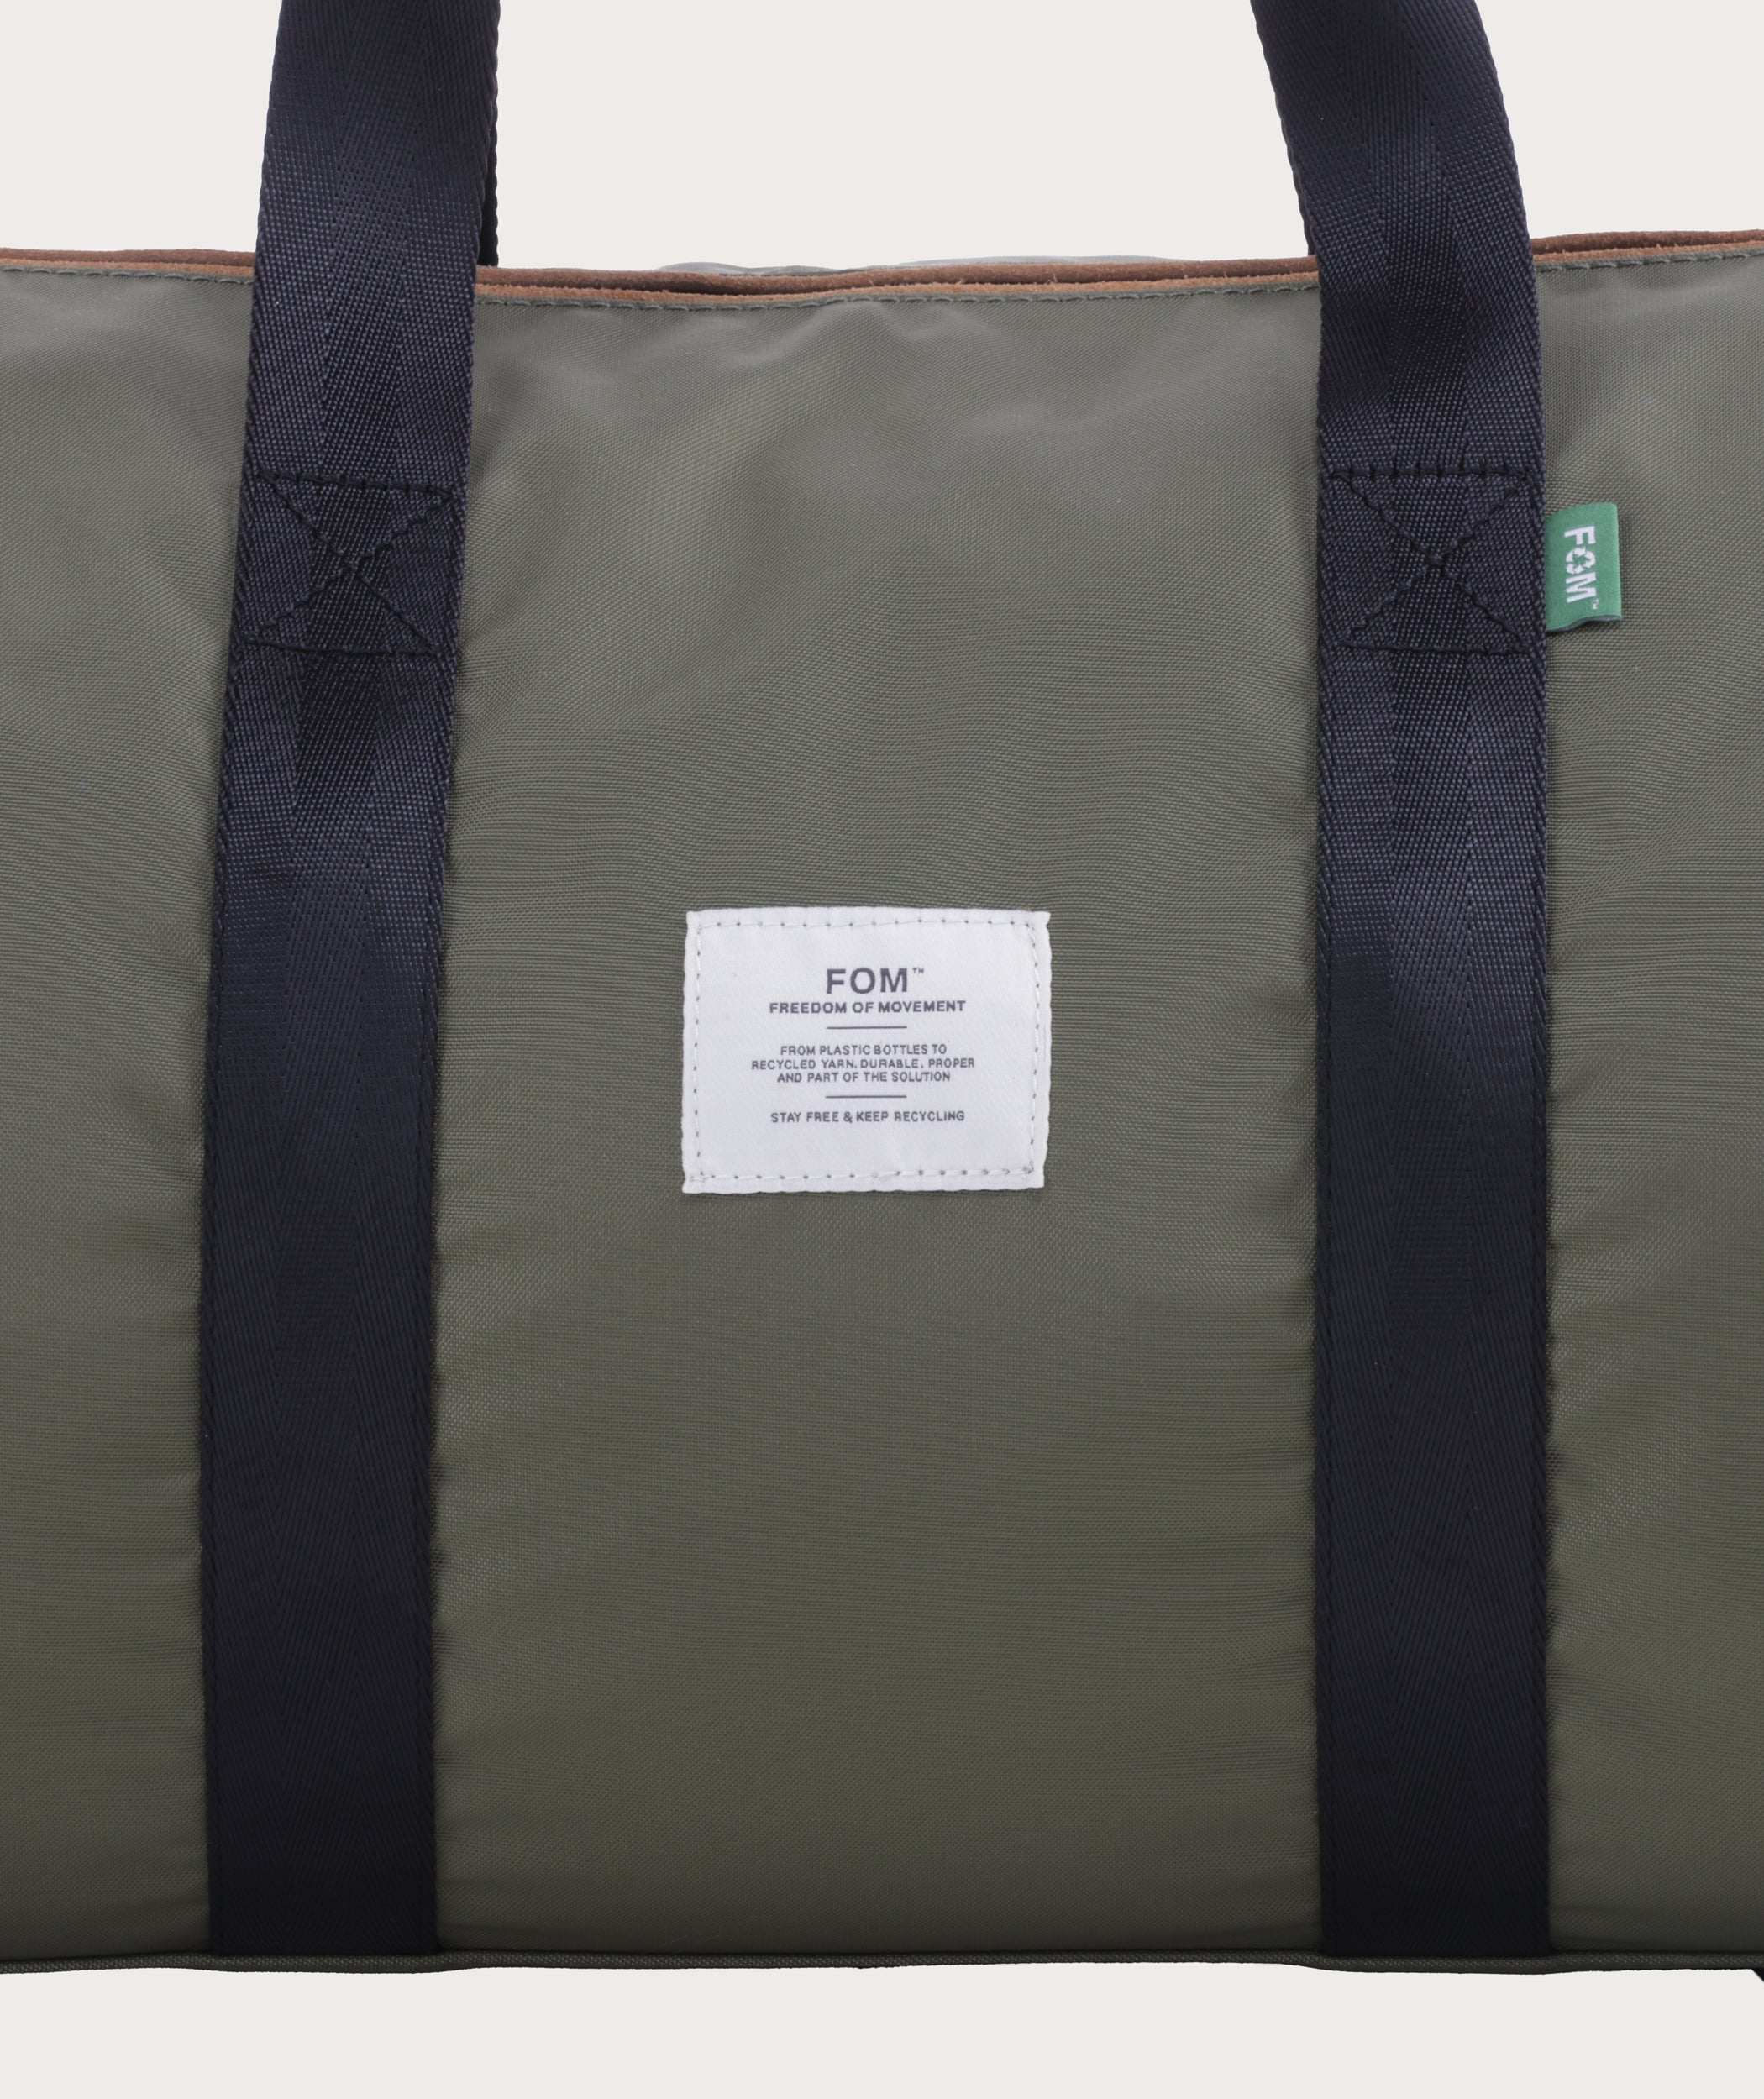 Recycled Duffel - Olive